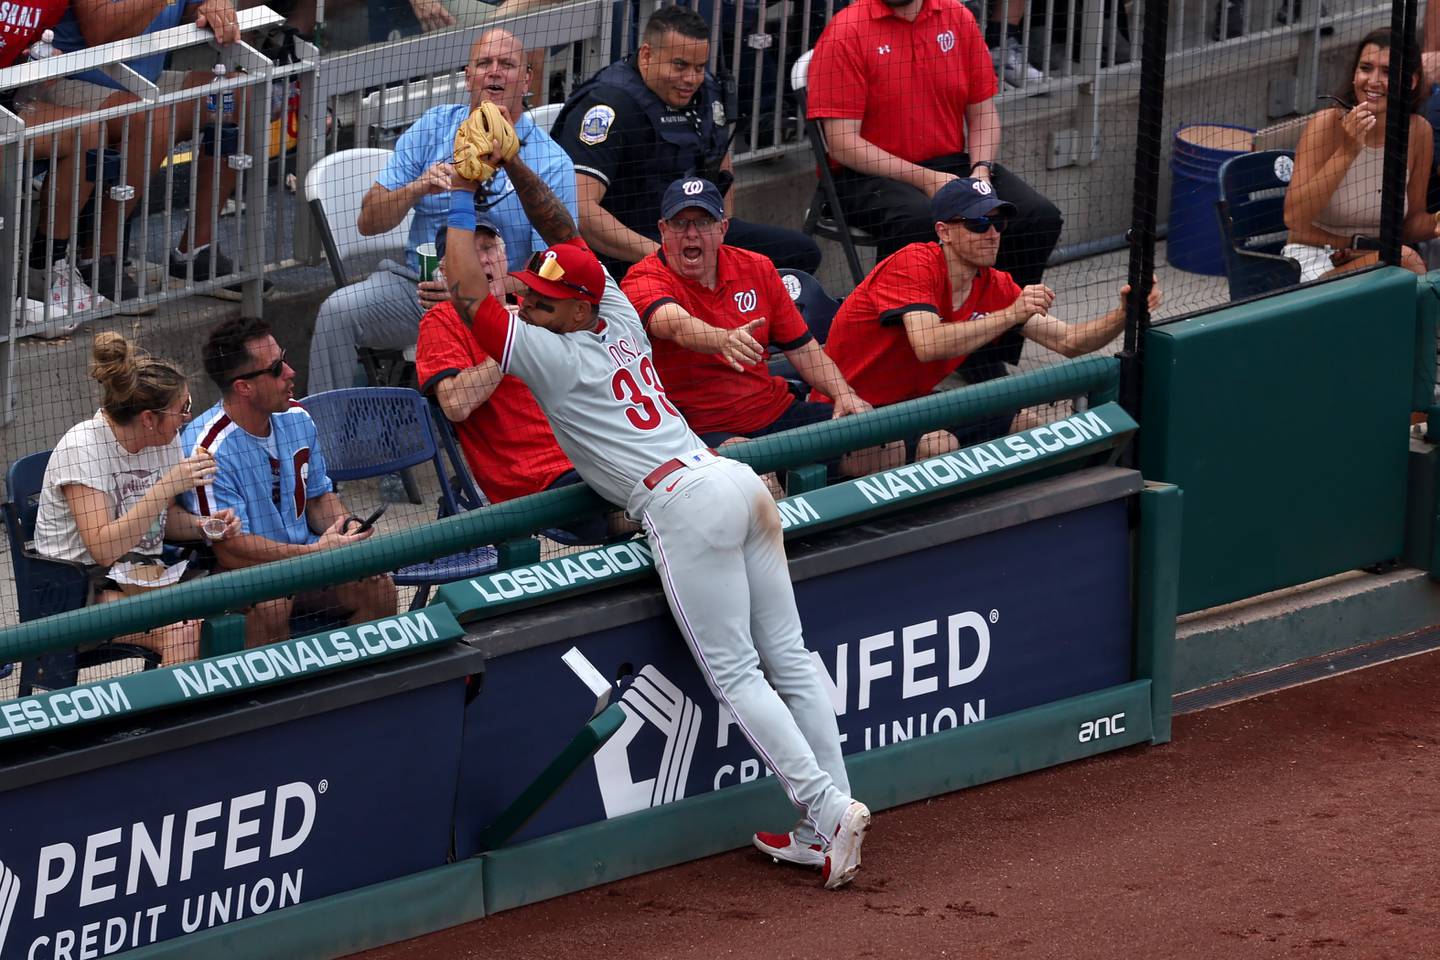 WASHINGTON, DC - JUNE 03: Edmundo Sosa #33 of the Philadelphia Phillies catches a foul ball hit by Dominic Smith #22 of the Washington Nationals for the third out of the sixth inning at Nationals Park on June 03, 2023 in Washington, DC.